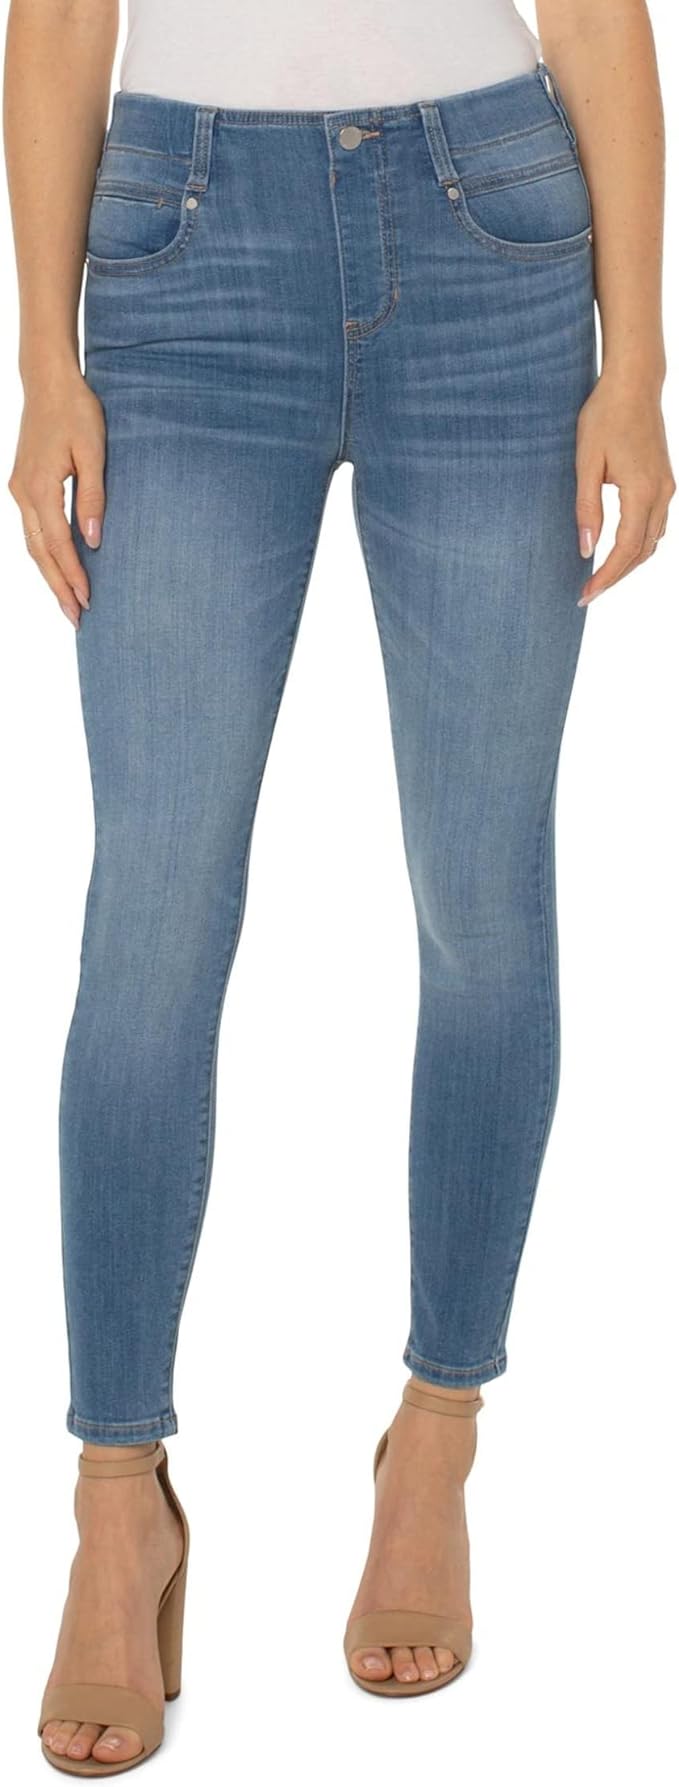 Gia Glider Jeans in Hayes